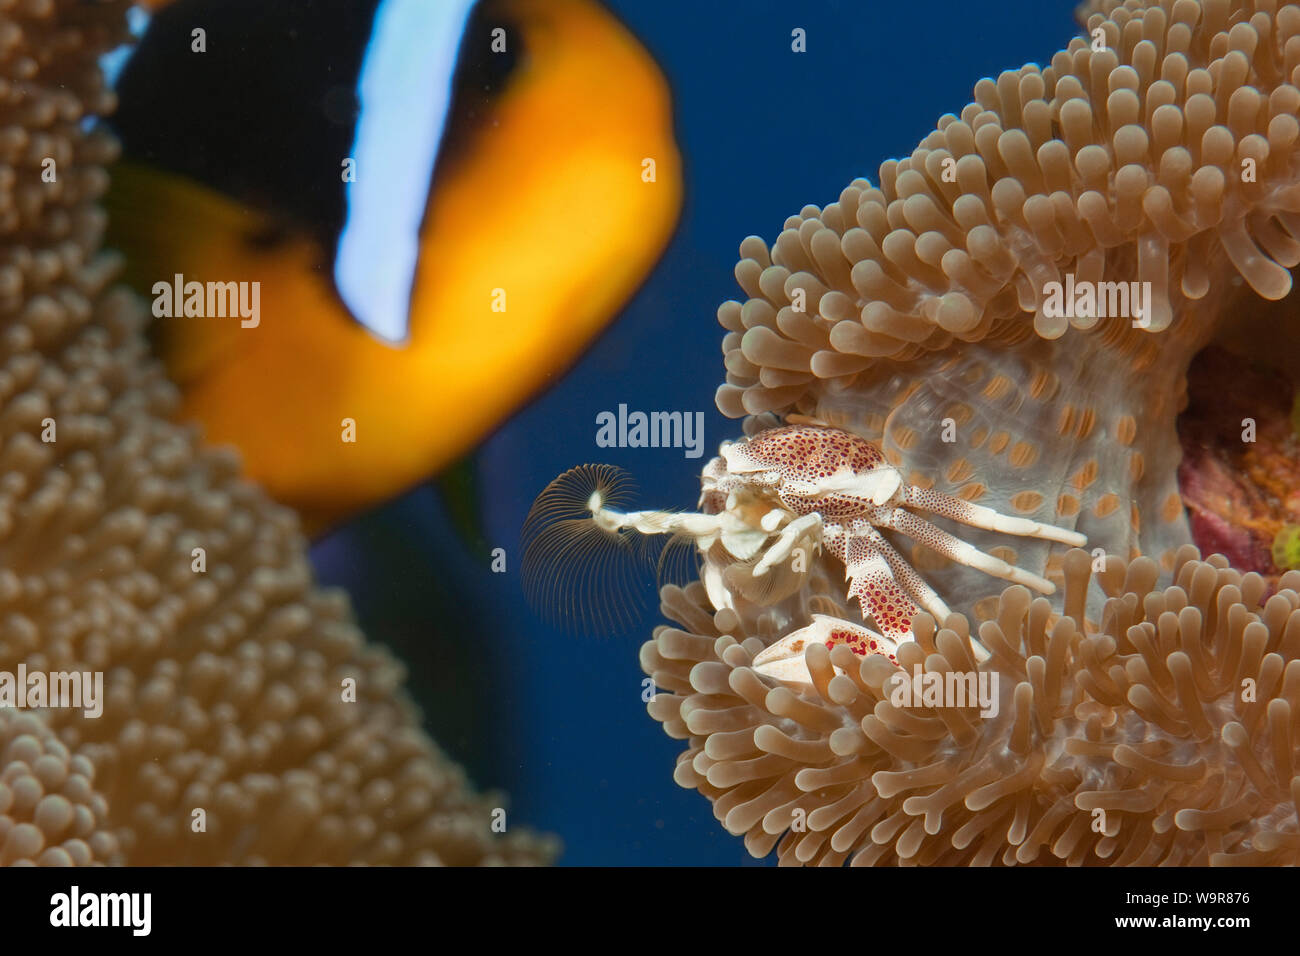 anemone porcelain crab, tentacles, catching plancton, Indo-Pacific, (Neopetrolisthes maculatus) Stock Photo